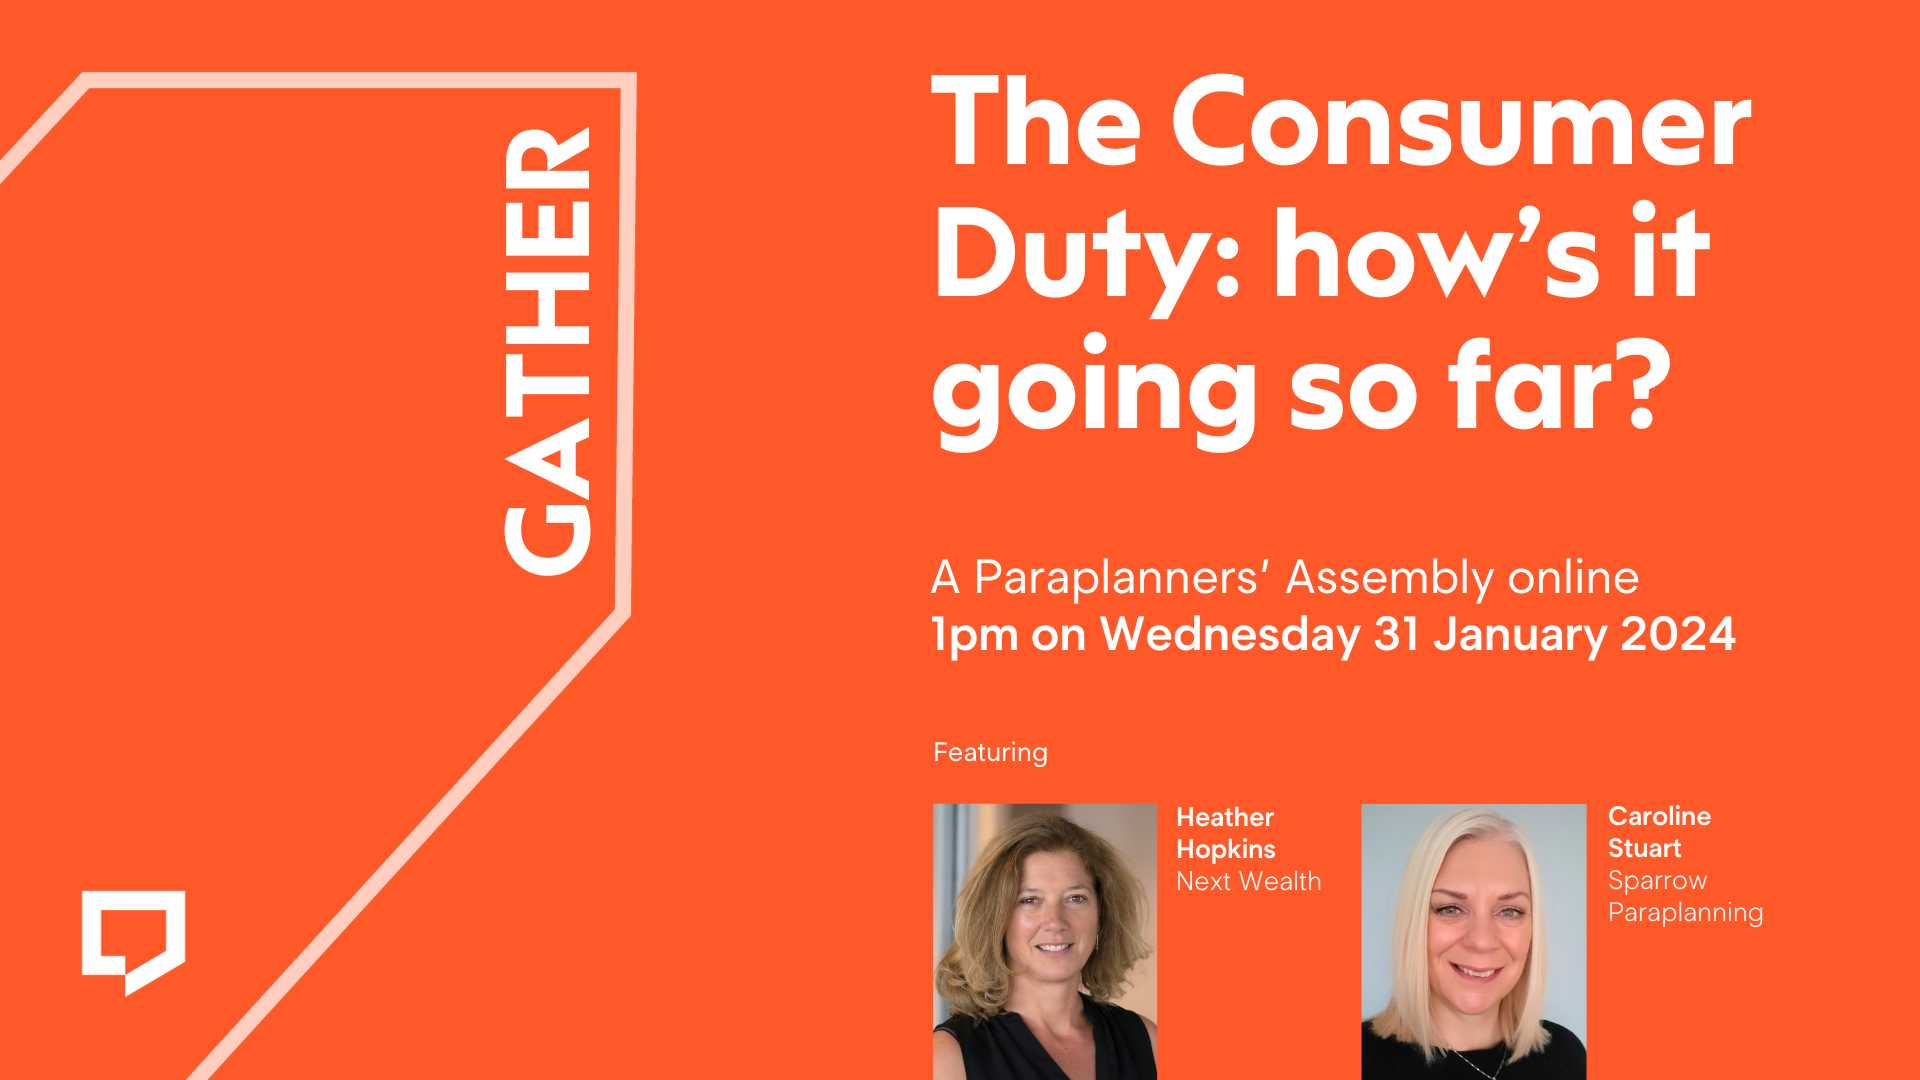 The Consumer Duty: how's it going so far? A Paraplanners' Assembly online at 1pm on Wednesday 31 January 2024. Featuring Heather Hopkins of Next Wealth and Caroline Stuart of Sparrow Paraplanning.